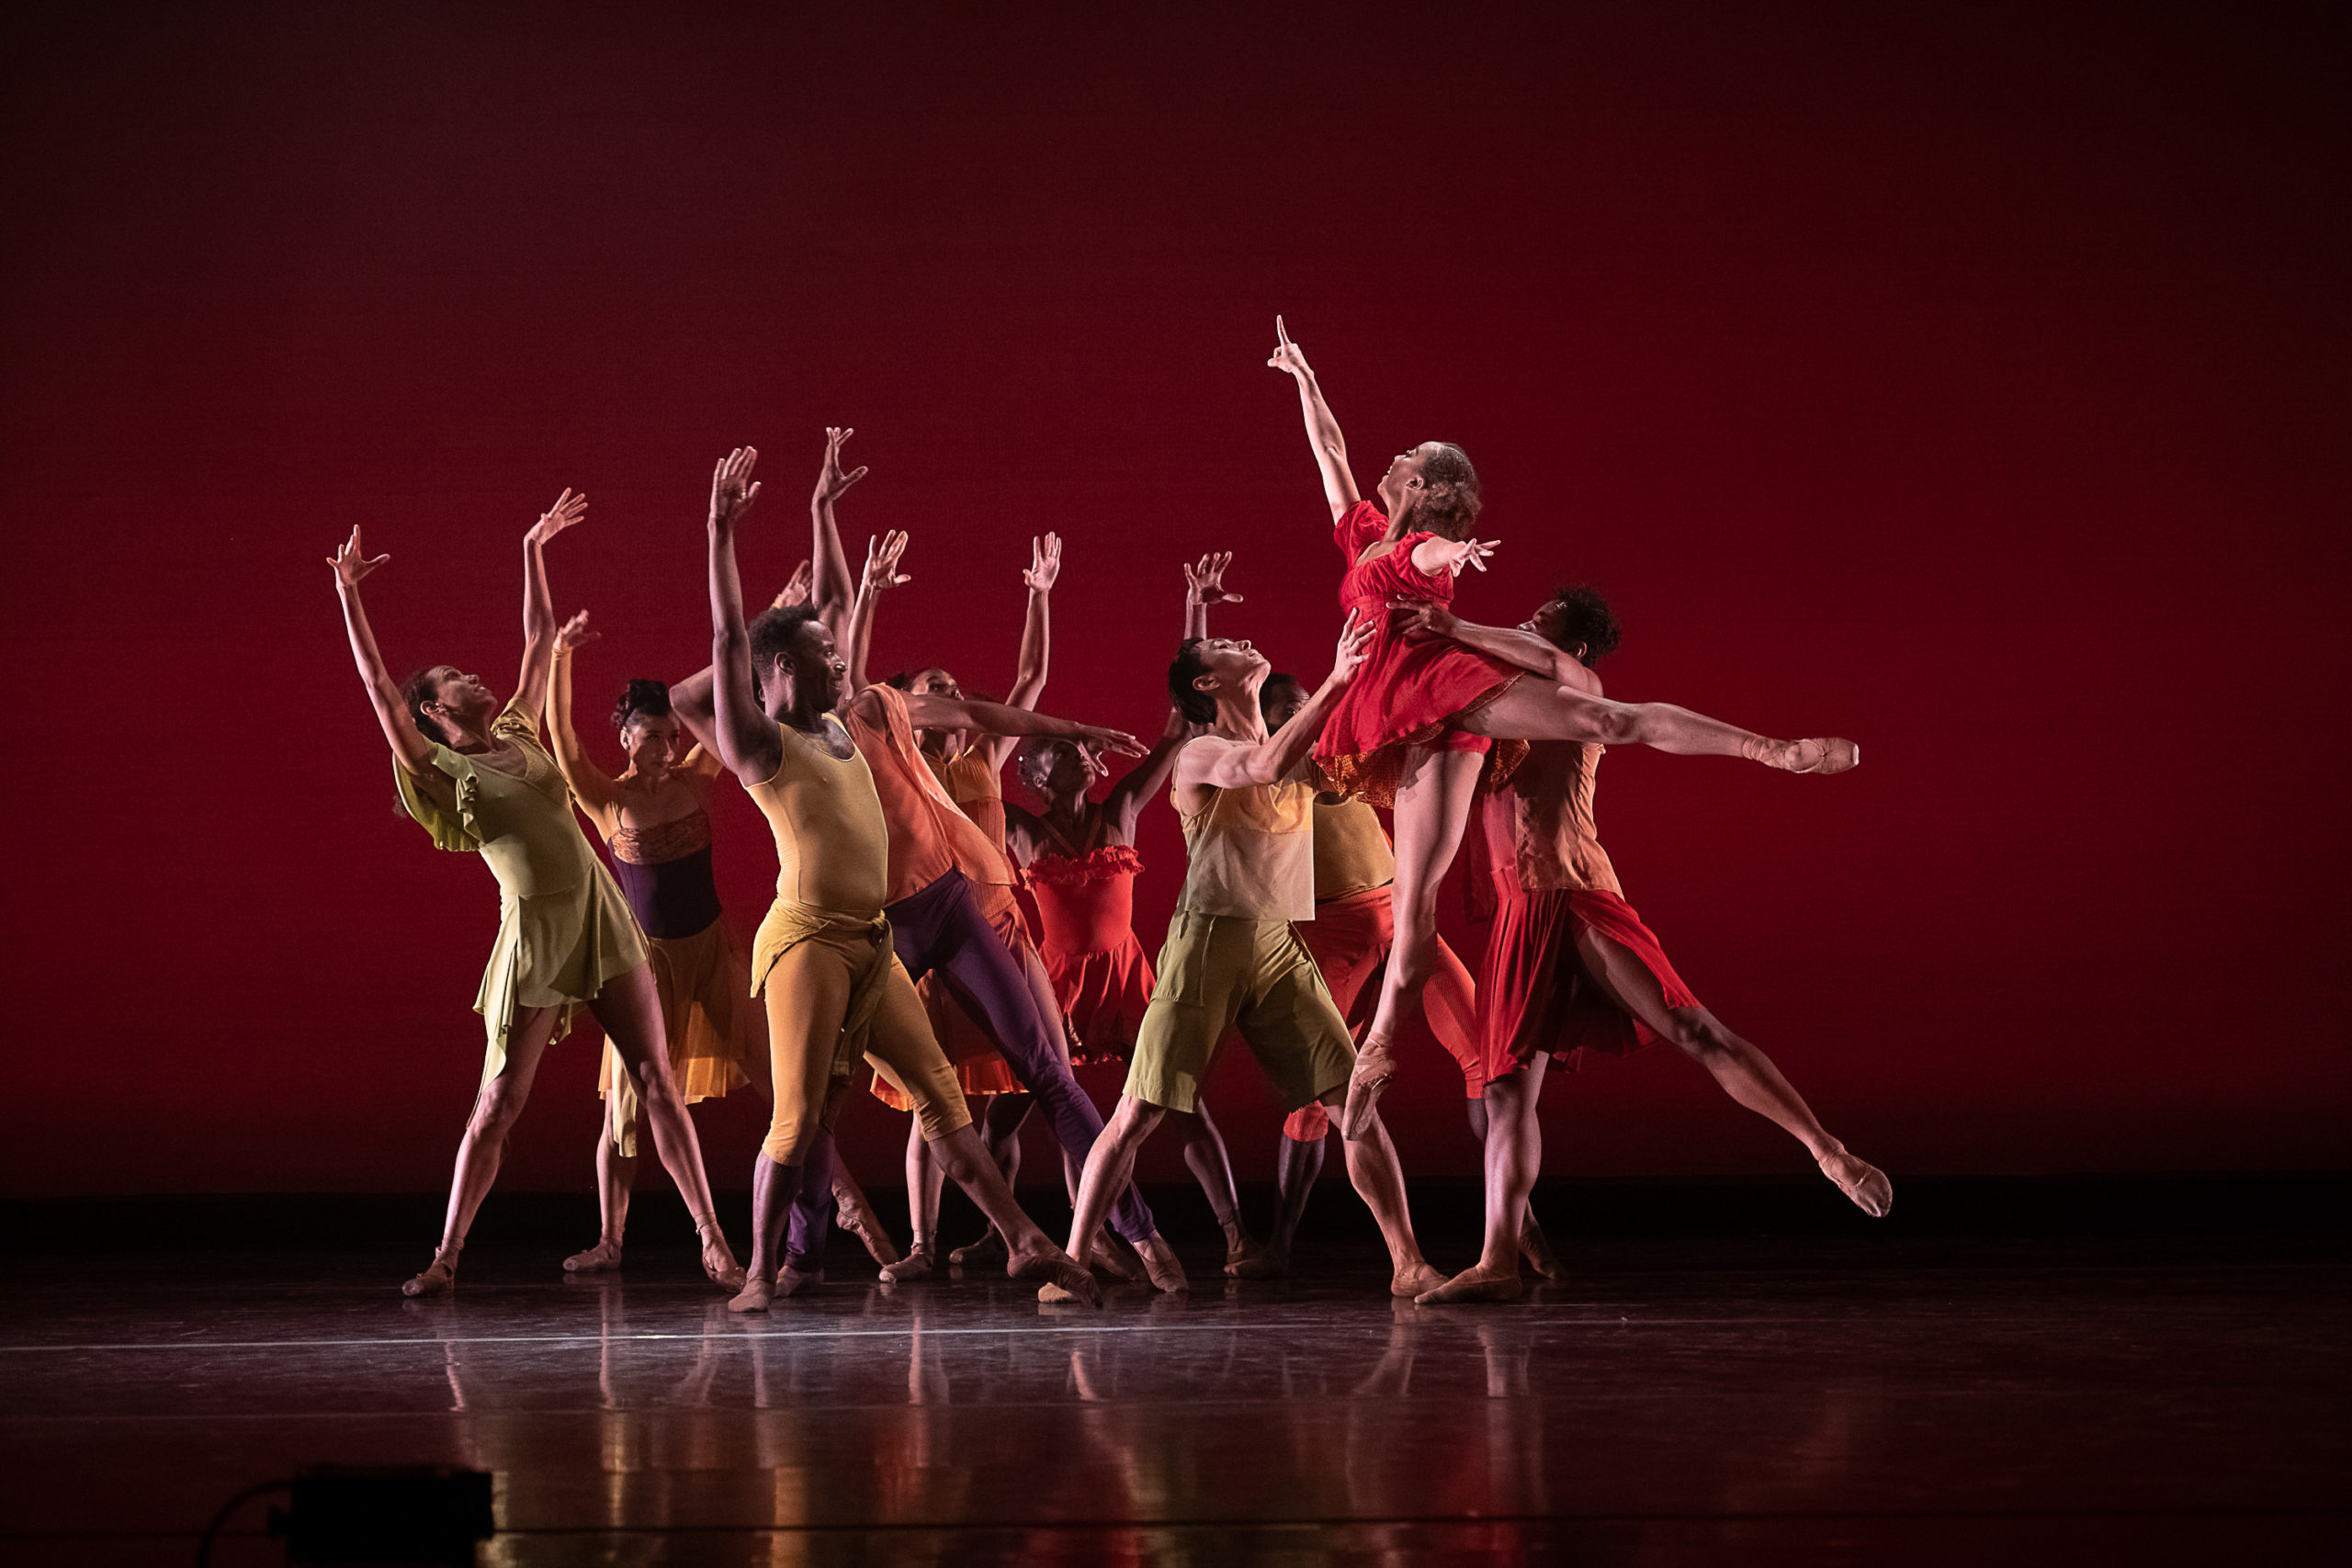 A large group if dancers from Dance Theatre of Harlem stand close together onstage with their legs in a wide stance facing stage left. They lift their arms up above their heads and arch slightly back in reaction to the dancer coming towards them. A female dancer in a red dance dress performs as temps levé towards the group as two men lift her by the waist. The dancers wear multi-colored costumes and perform in front of a red backdrop.